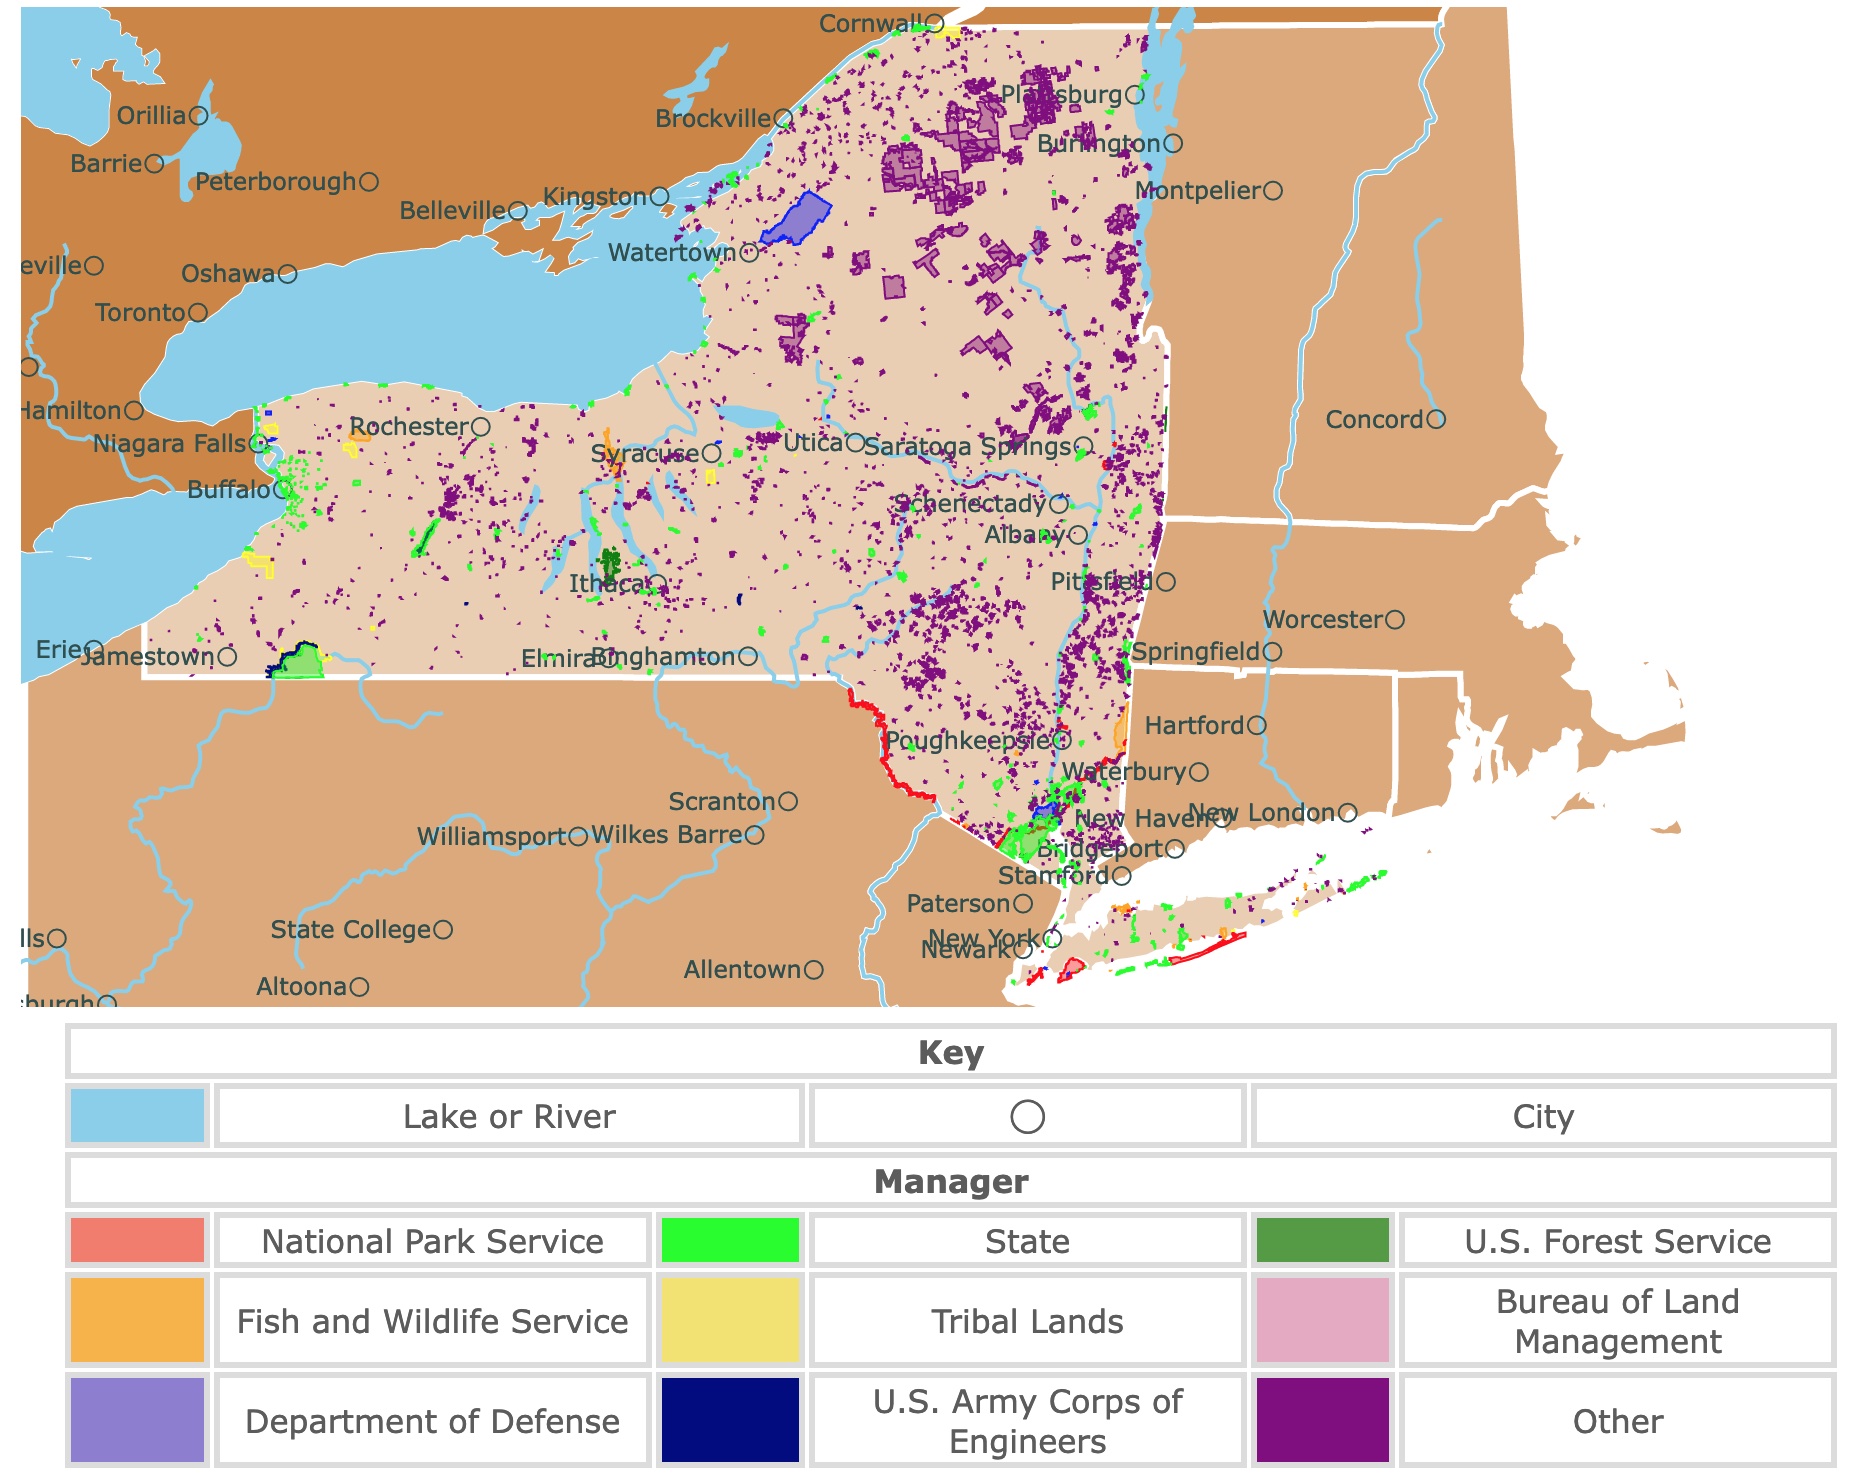 Map of New York's state parks, national parks, forests, and public lands areas